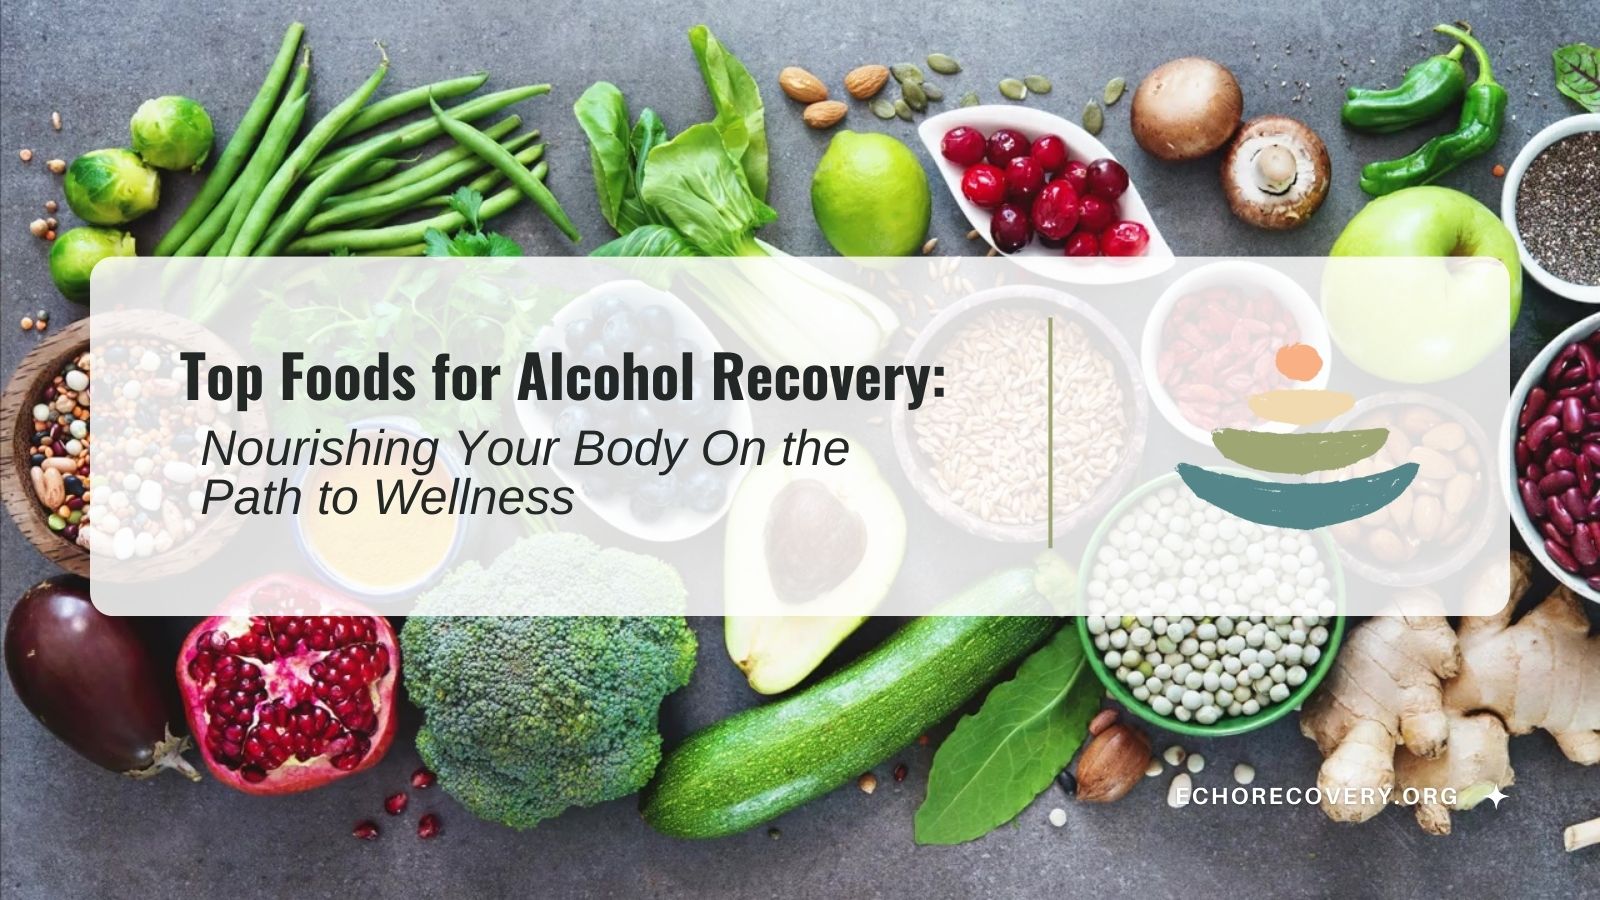 Top Foods for Alcohol Recovery: Nourishing Your Body On the Path to Wellness